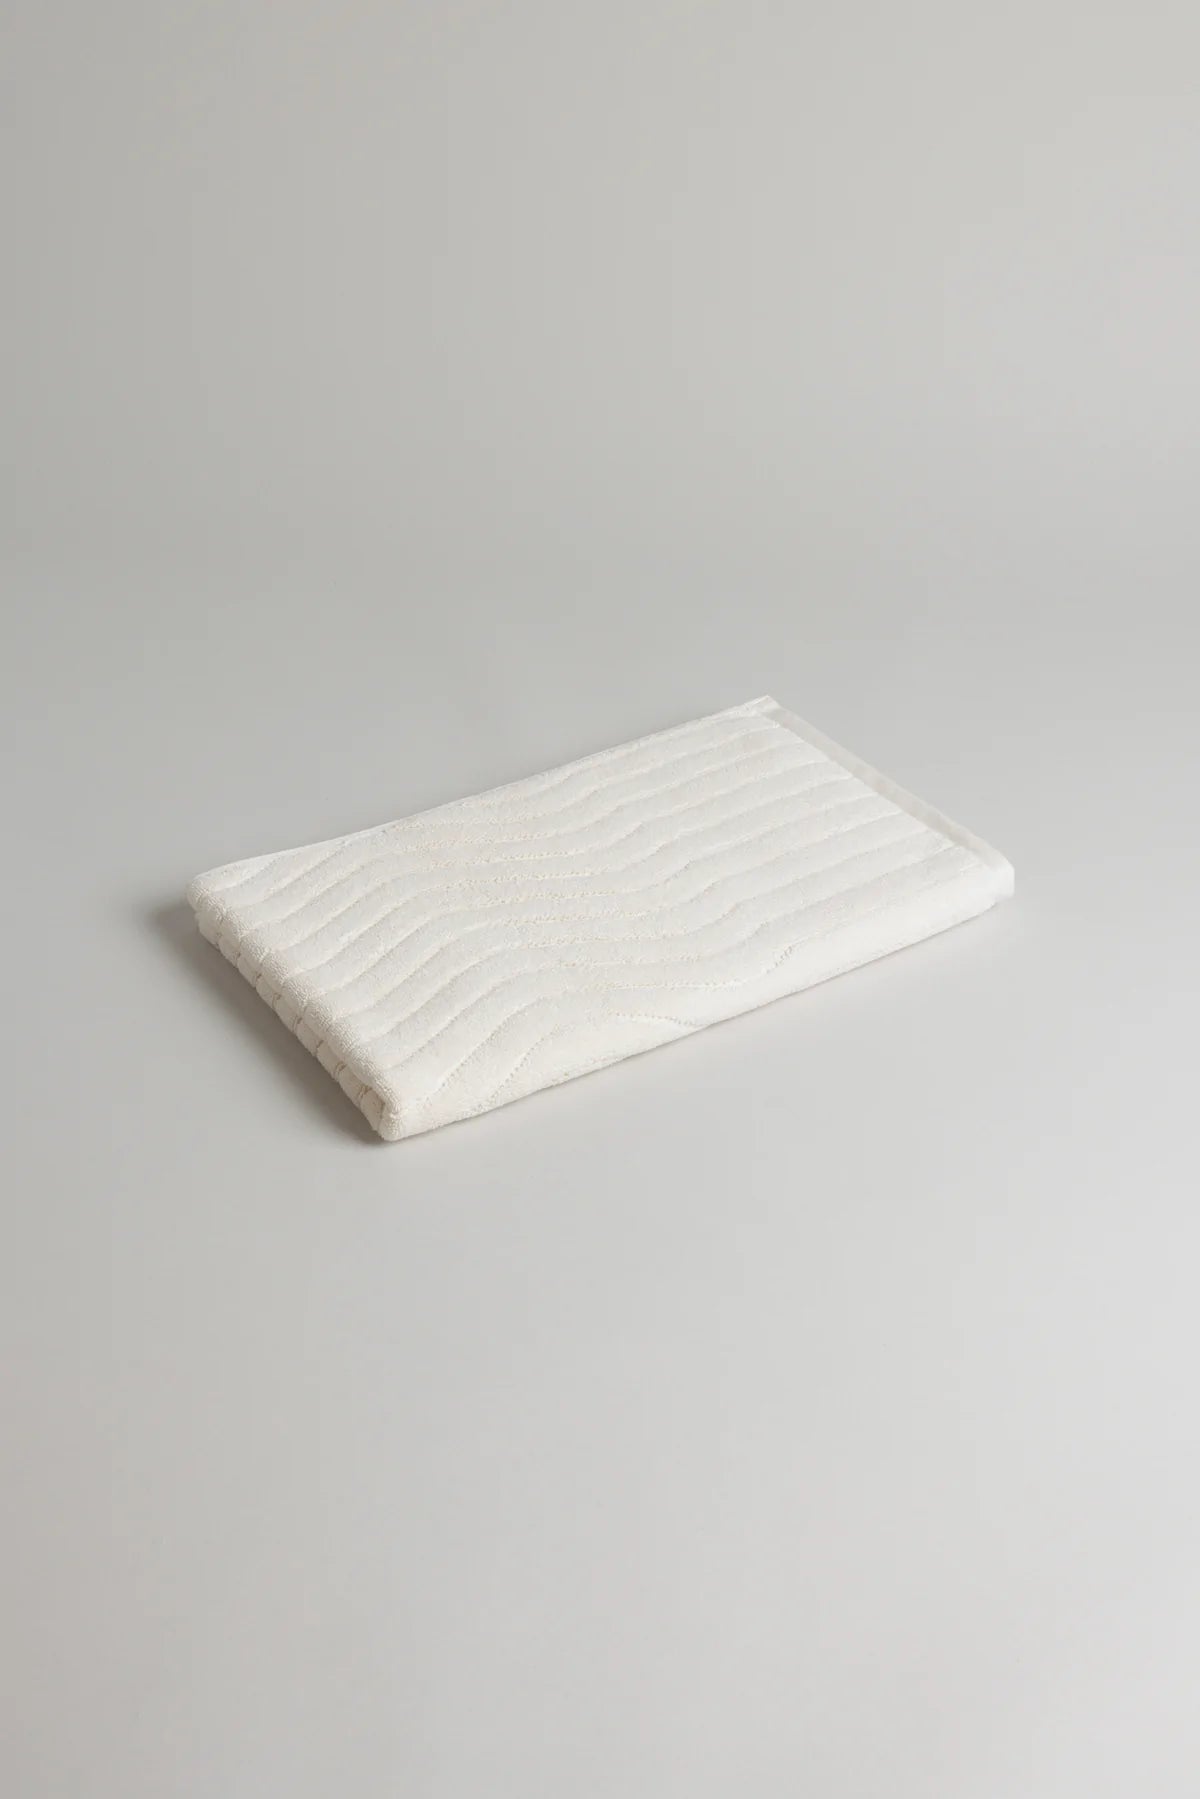 Eyre Bath Mat in Ivory by Baina